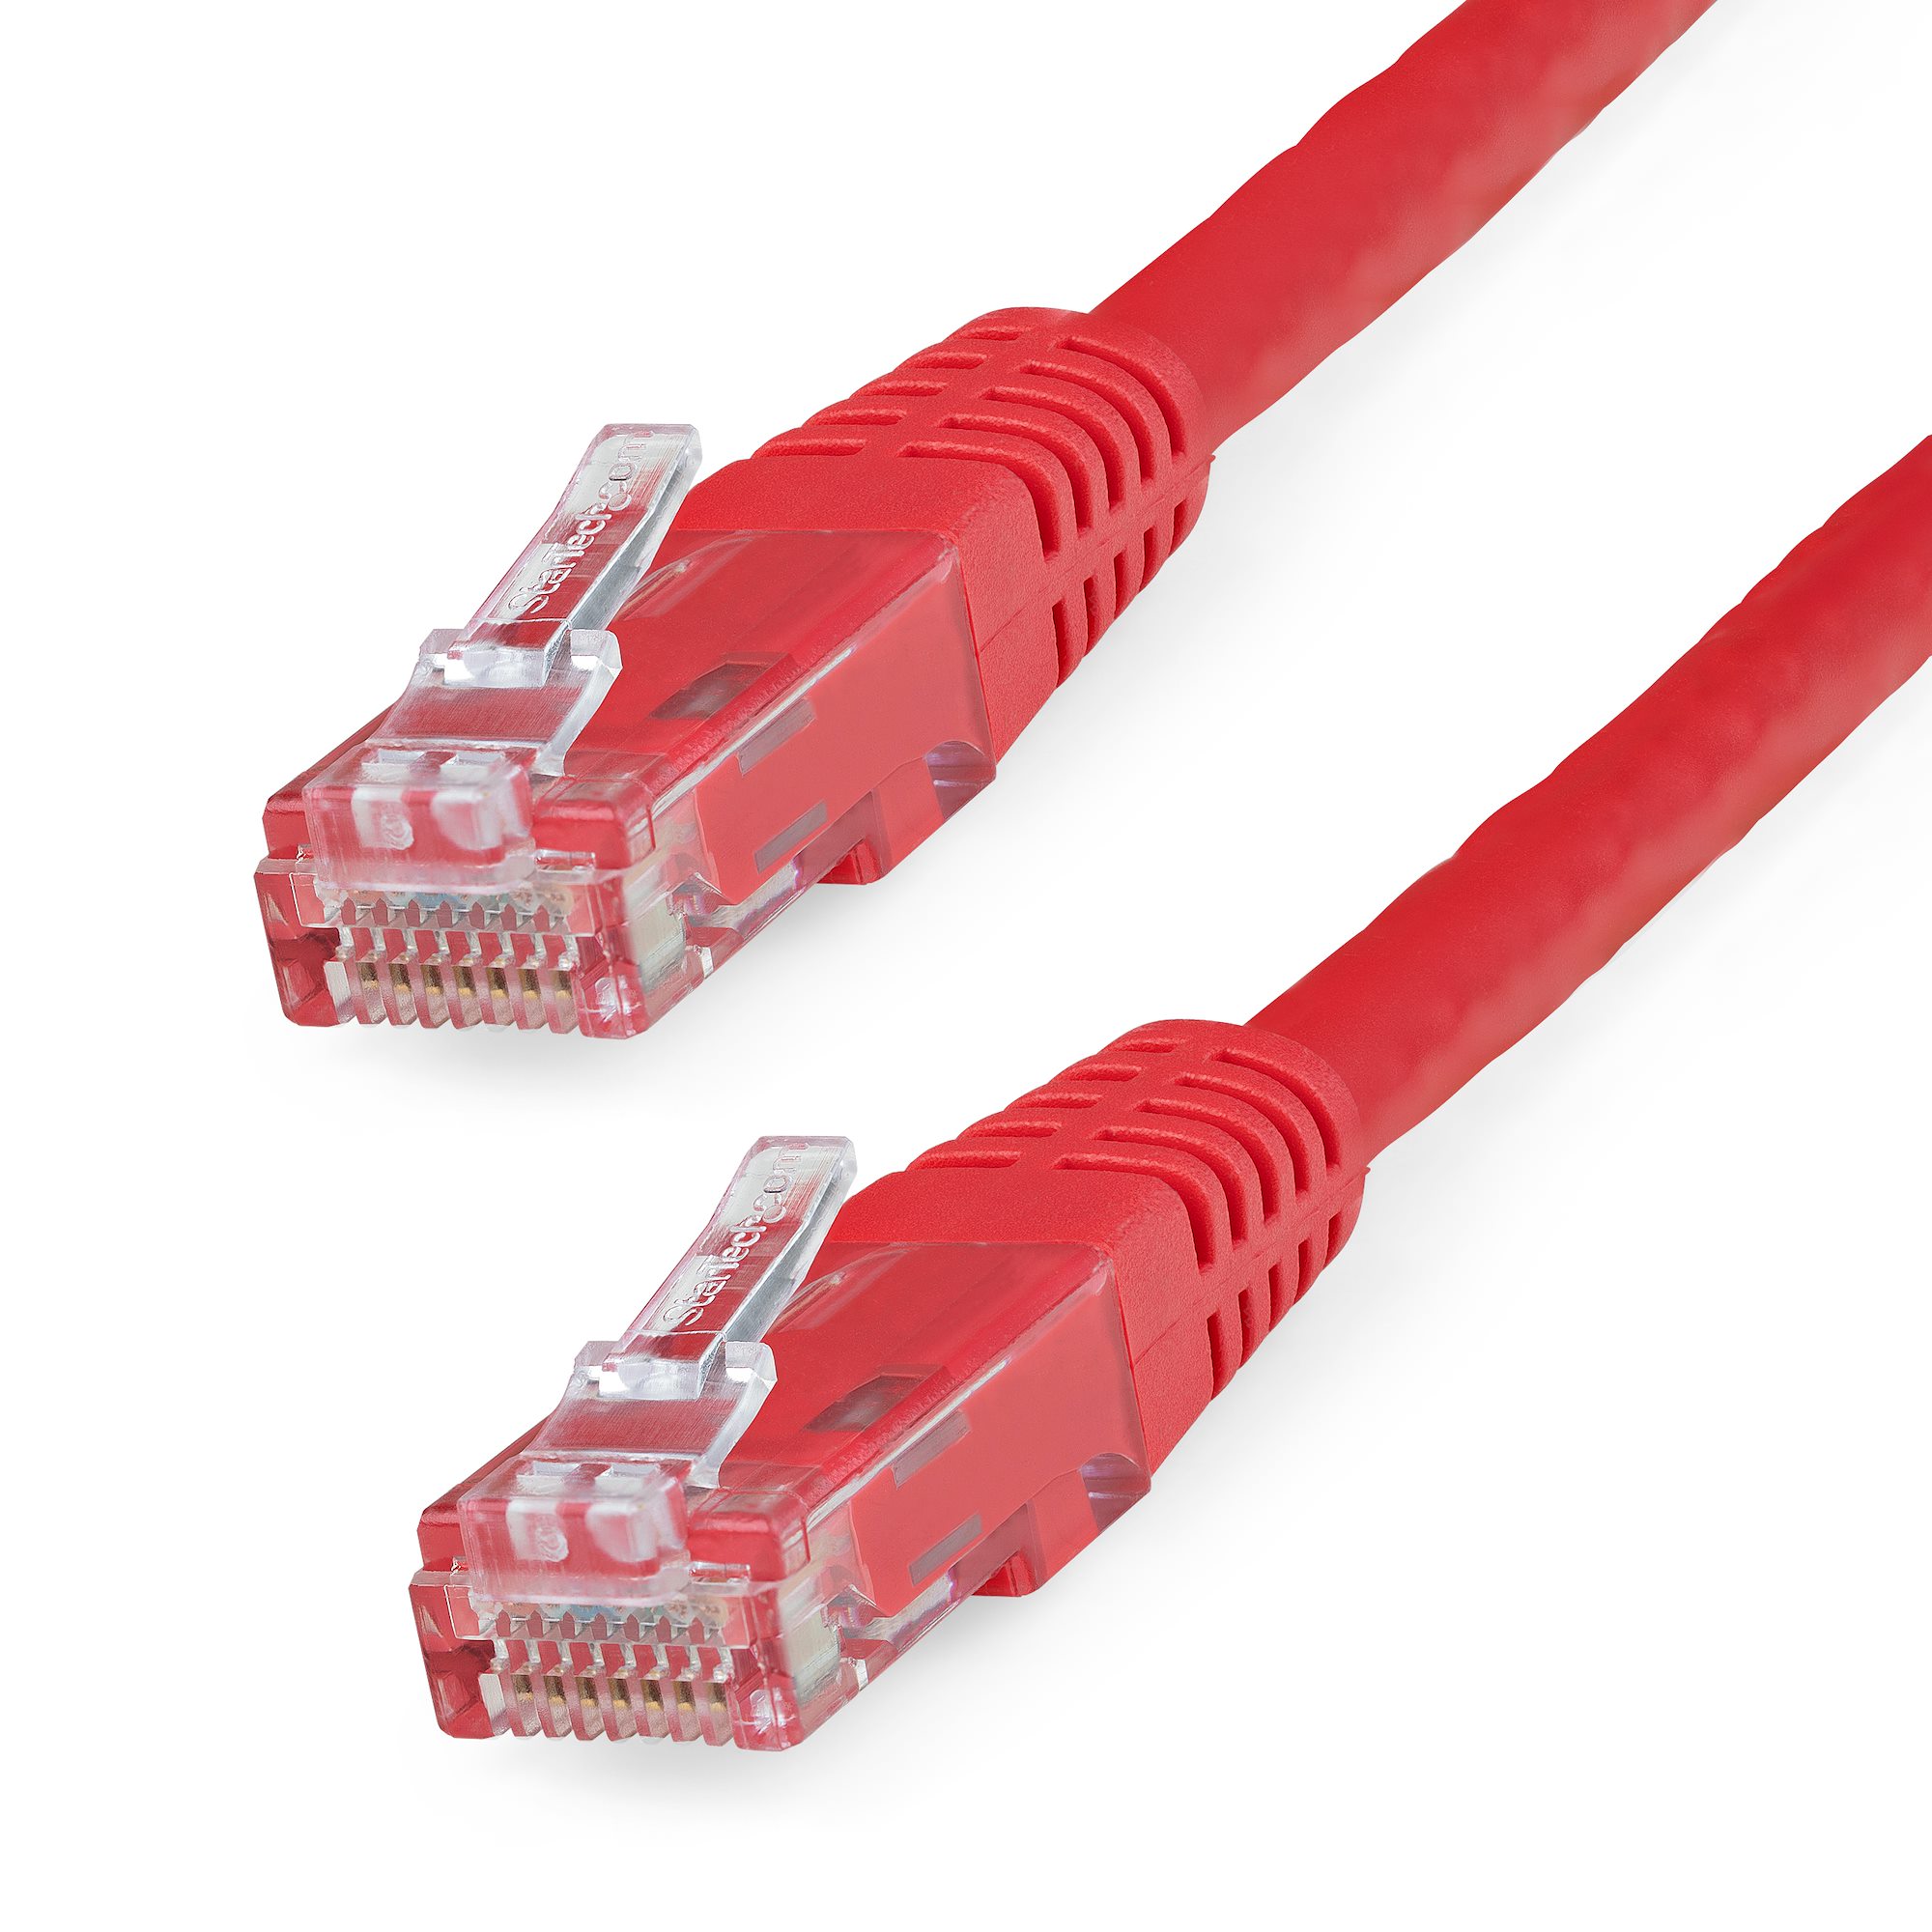 Cat 6 Ethernet Cable 10ft 2 Pack at a Cat5e Price but Higher Bandwidth Cat6 Computer Cable with Snagless RJ45 Connectors Cat6 Ethernet Patch Cable Short Flat Internet Network Cable White 